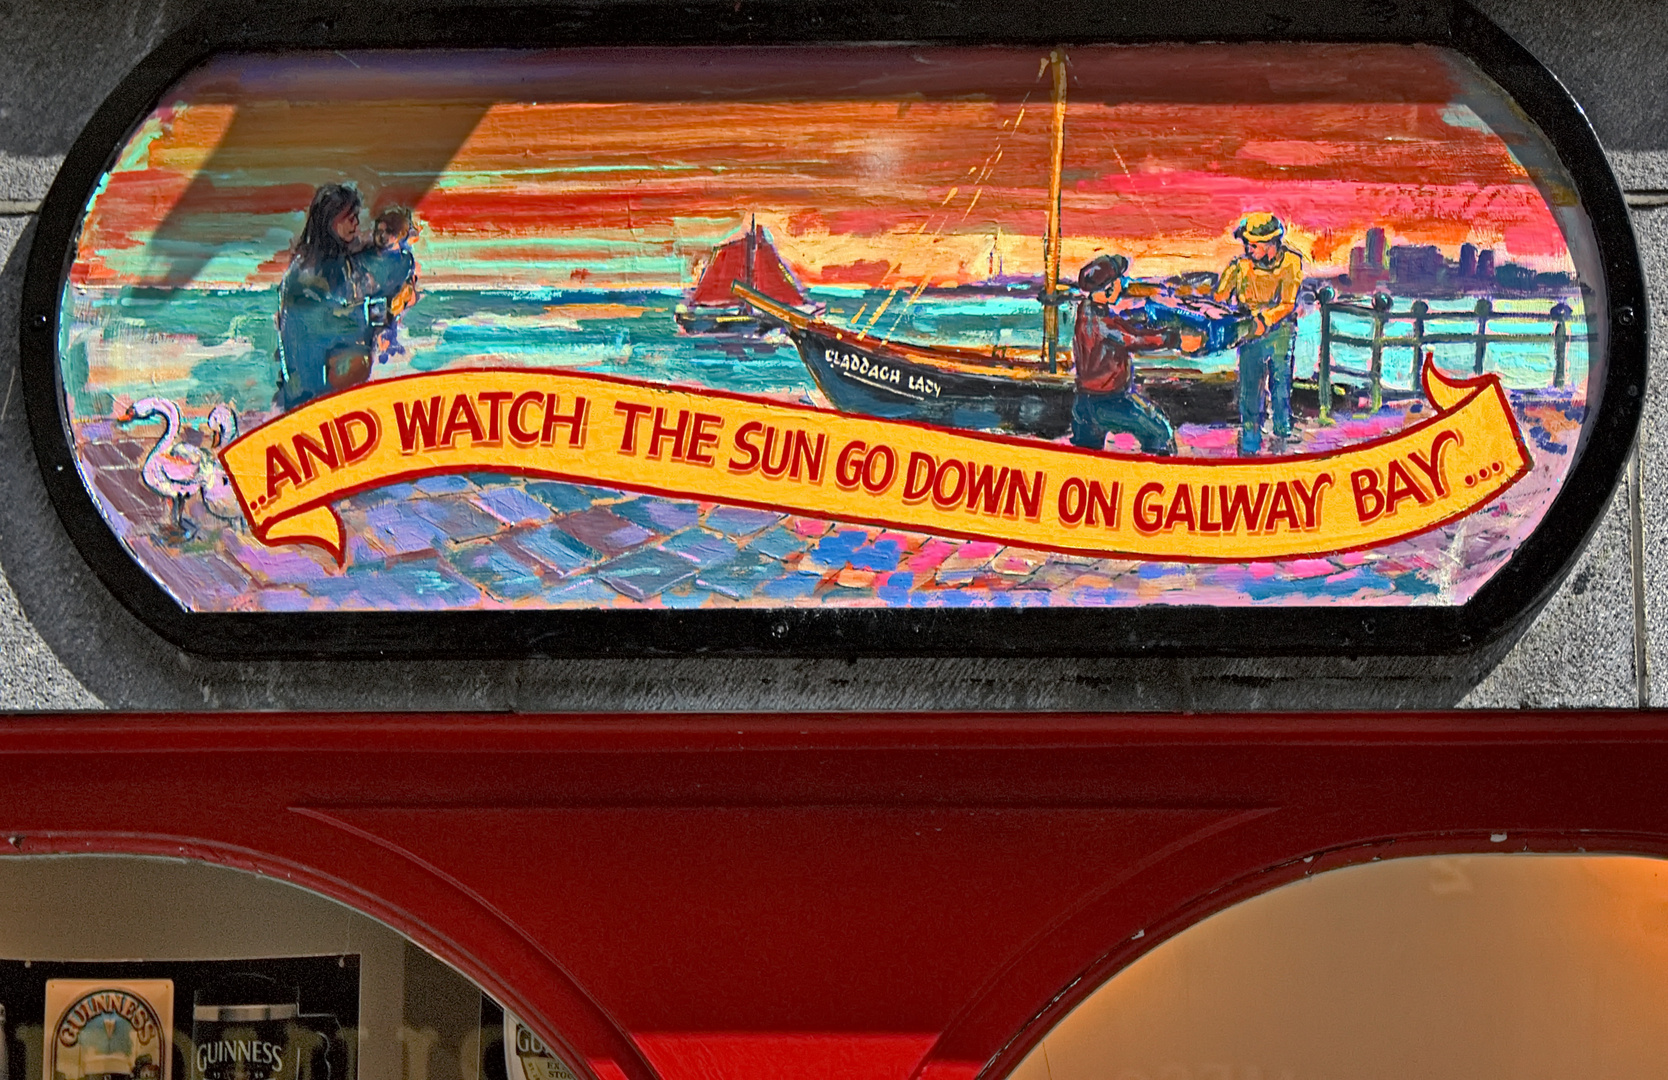 ..and watch the sun go down on Galway Bay...